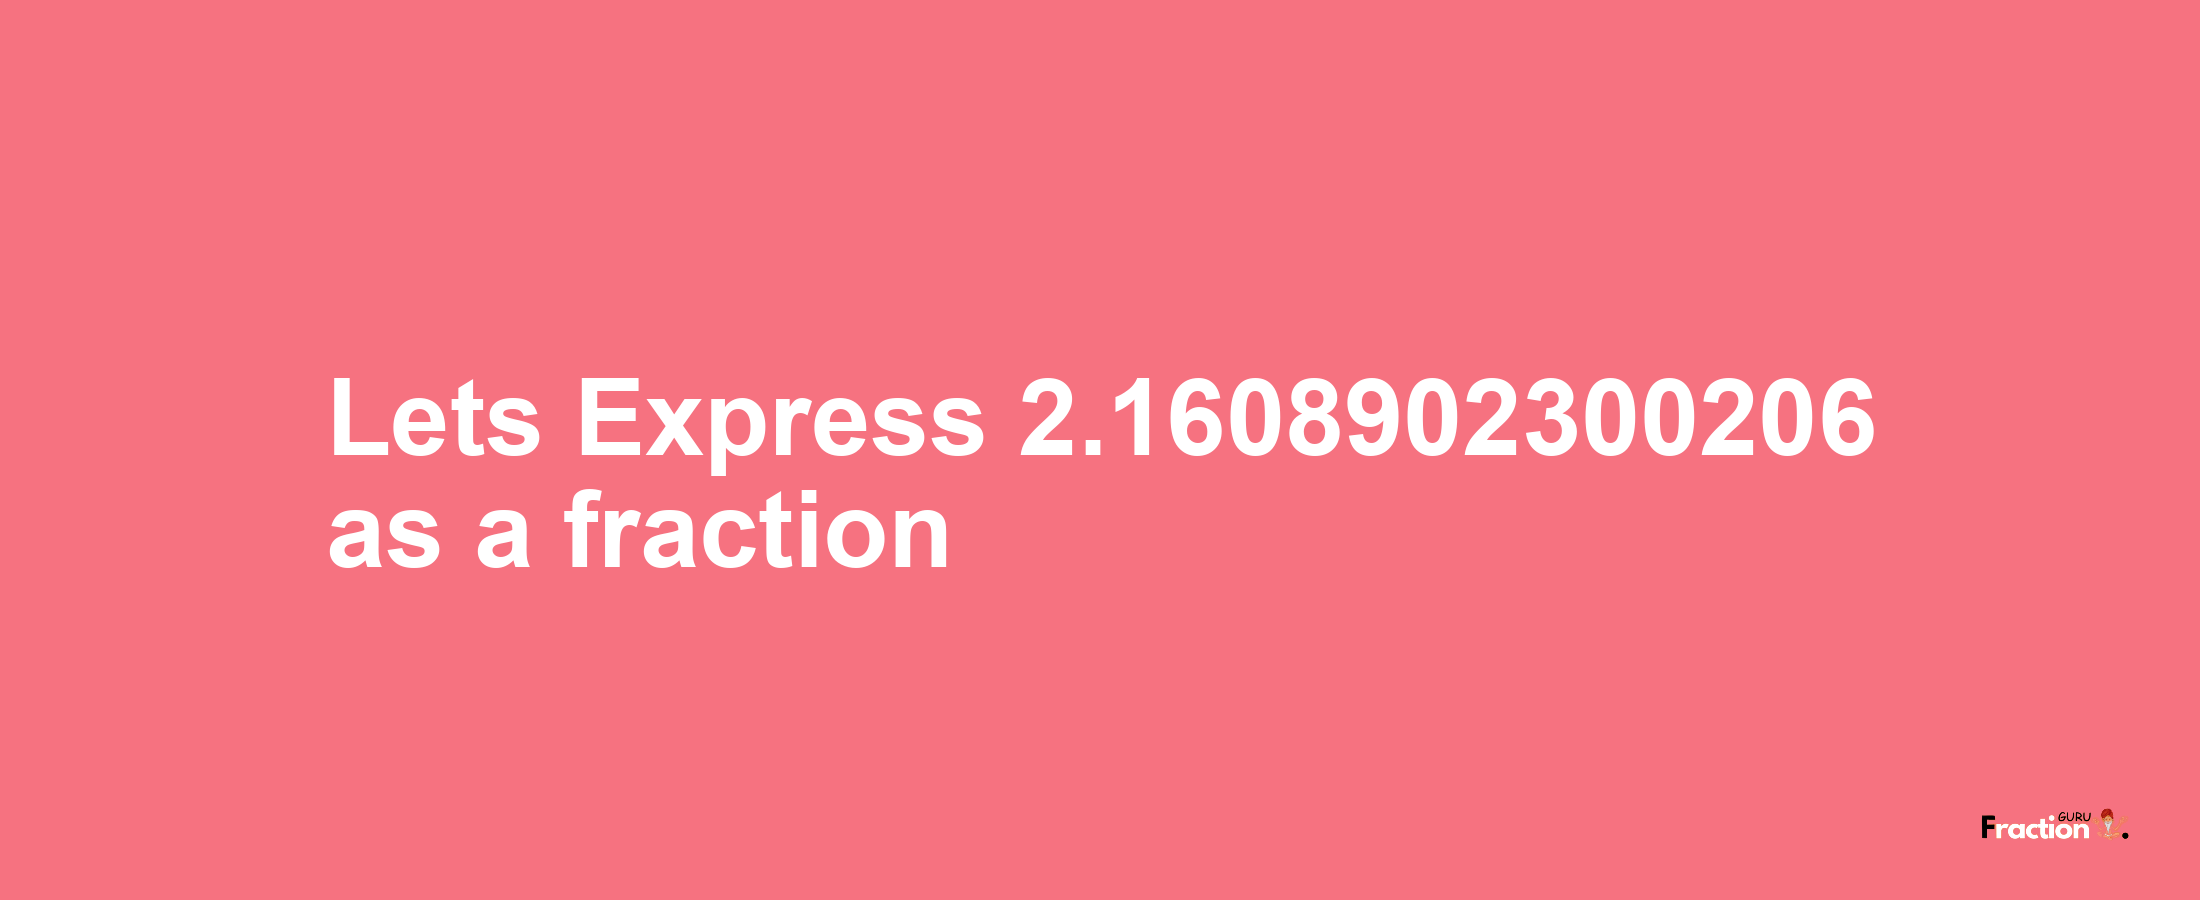 Lets Express 2.1608902300206 as afraction